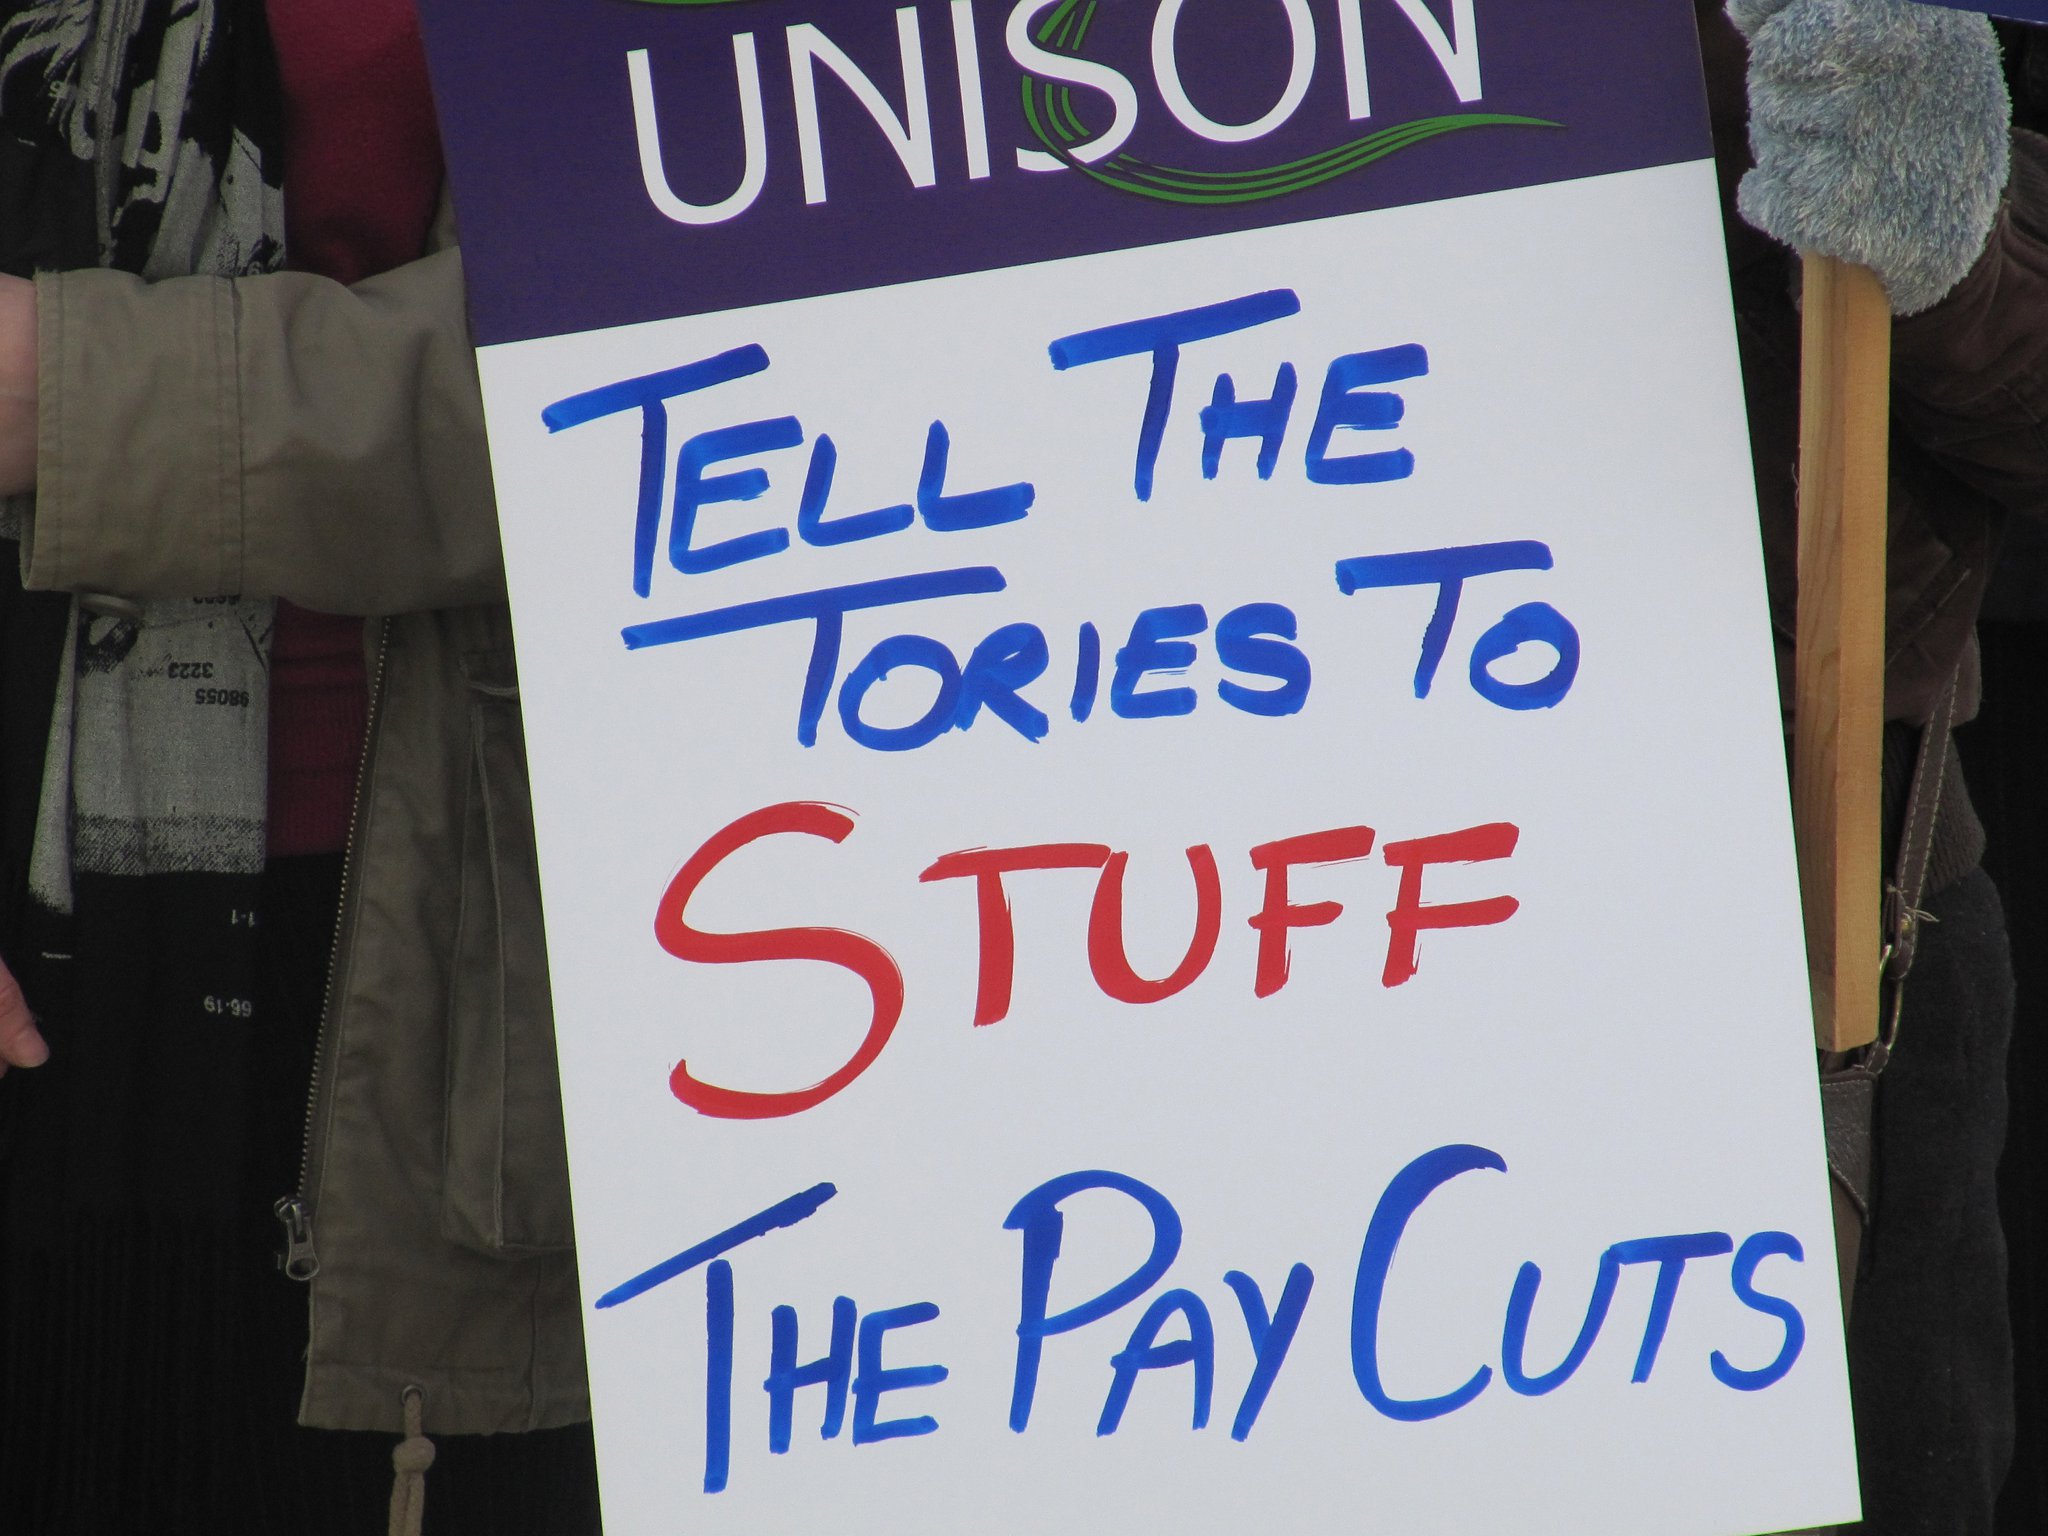 UNISON placard: Tell the Tories to stuff the pay cuts